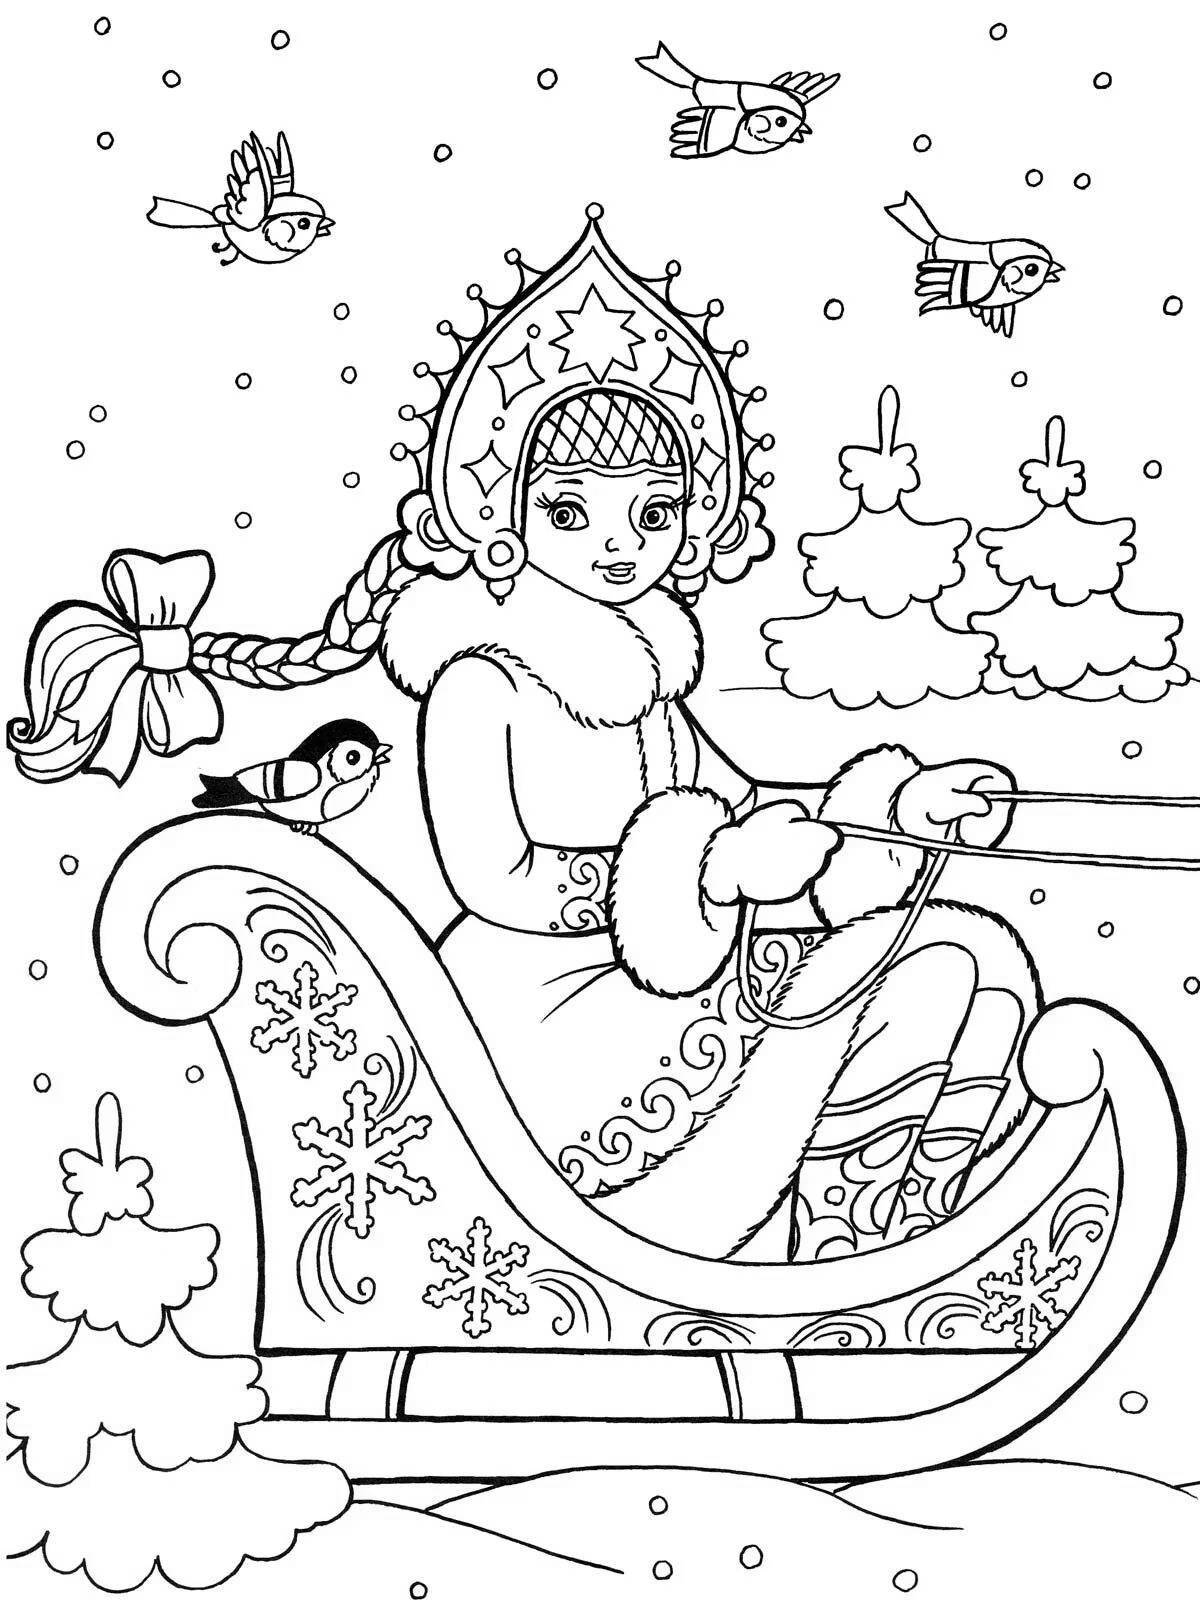 Fabulous Christmas coloring book for girls 6 years old